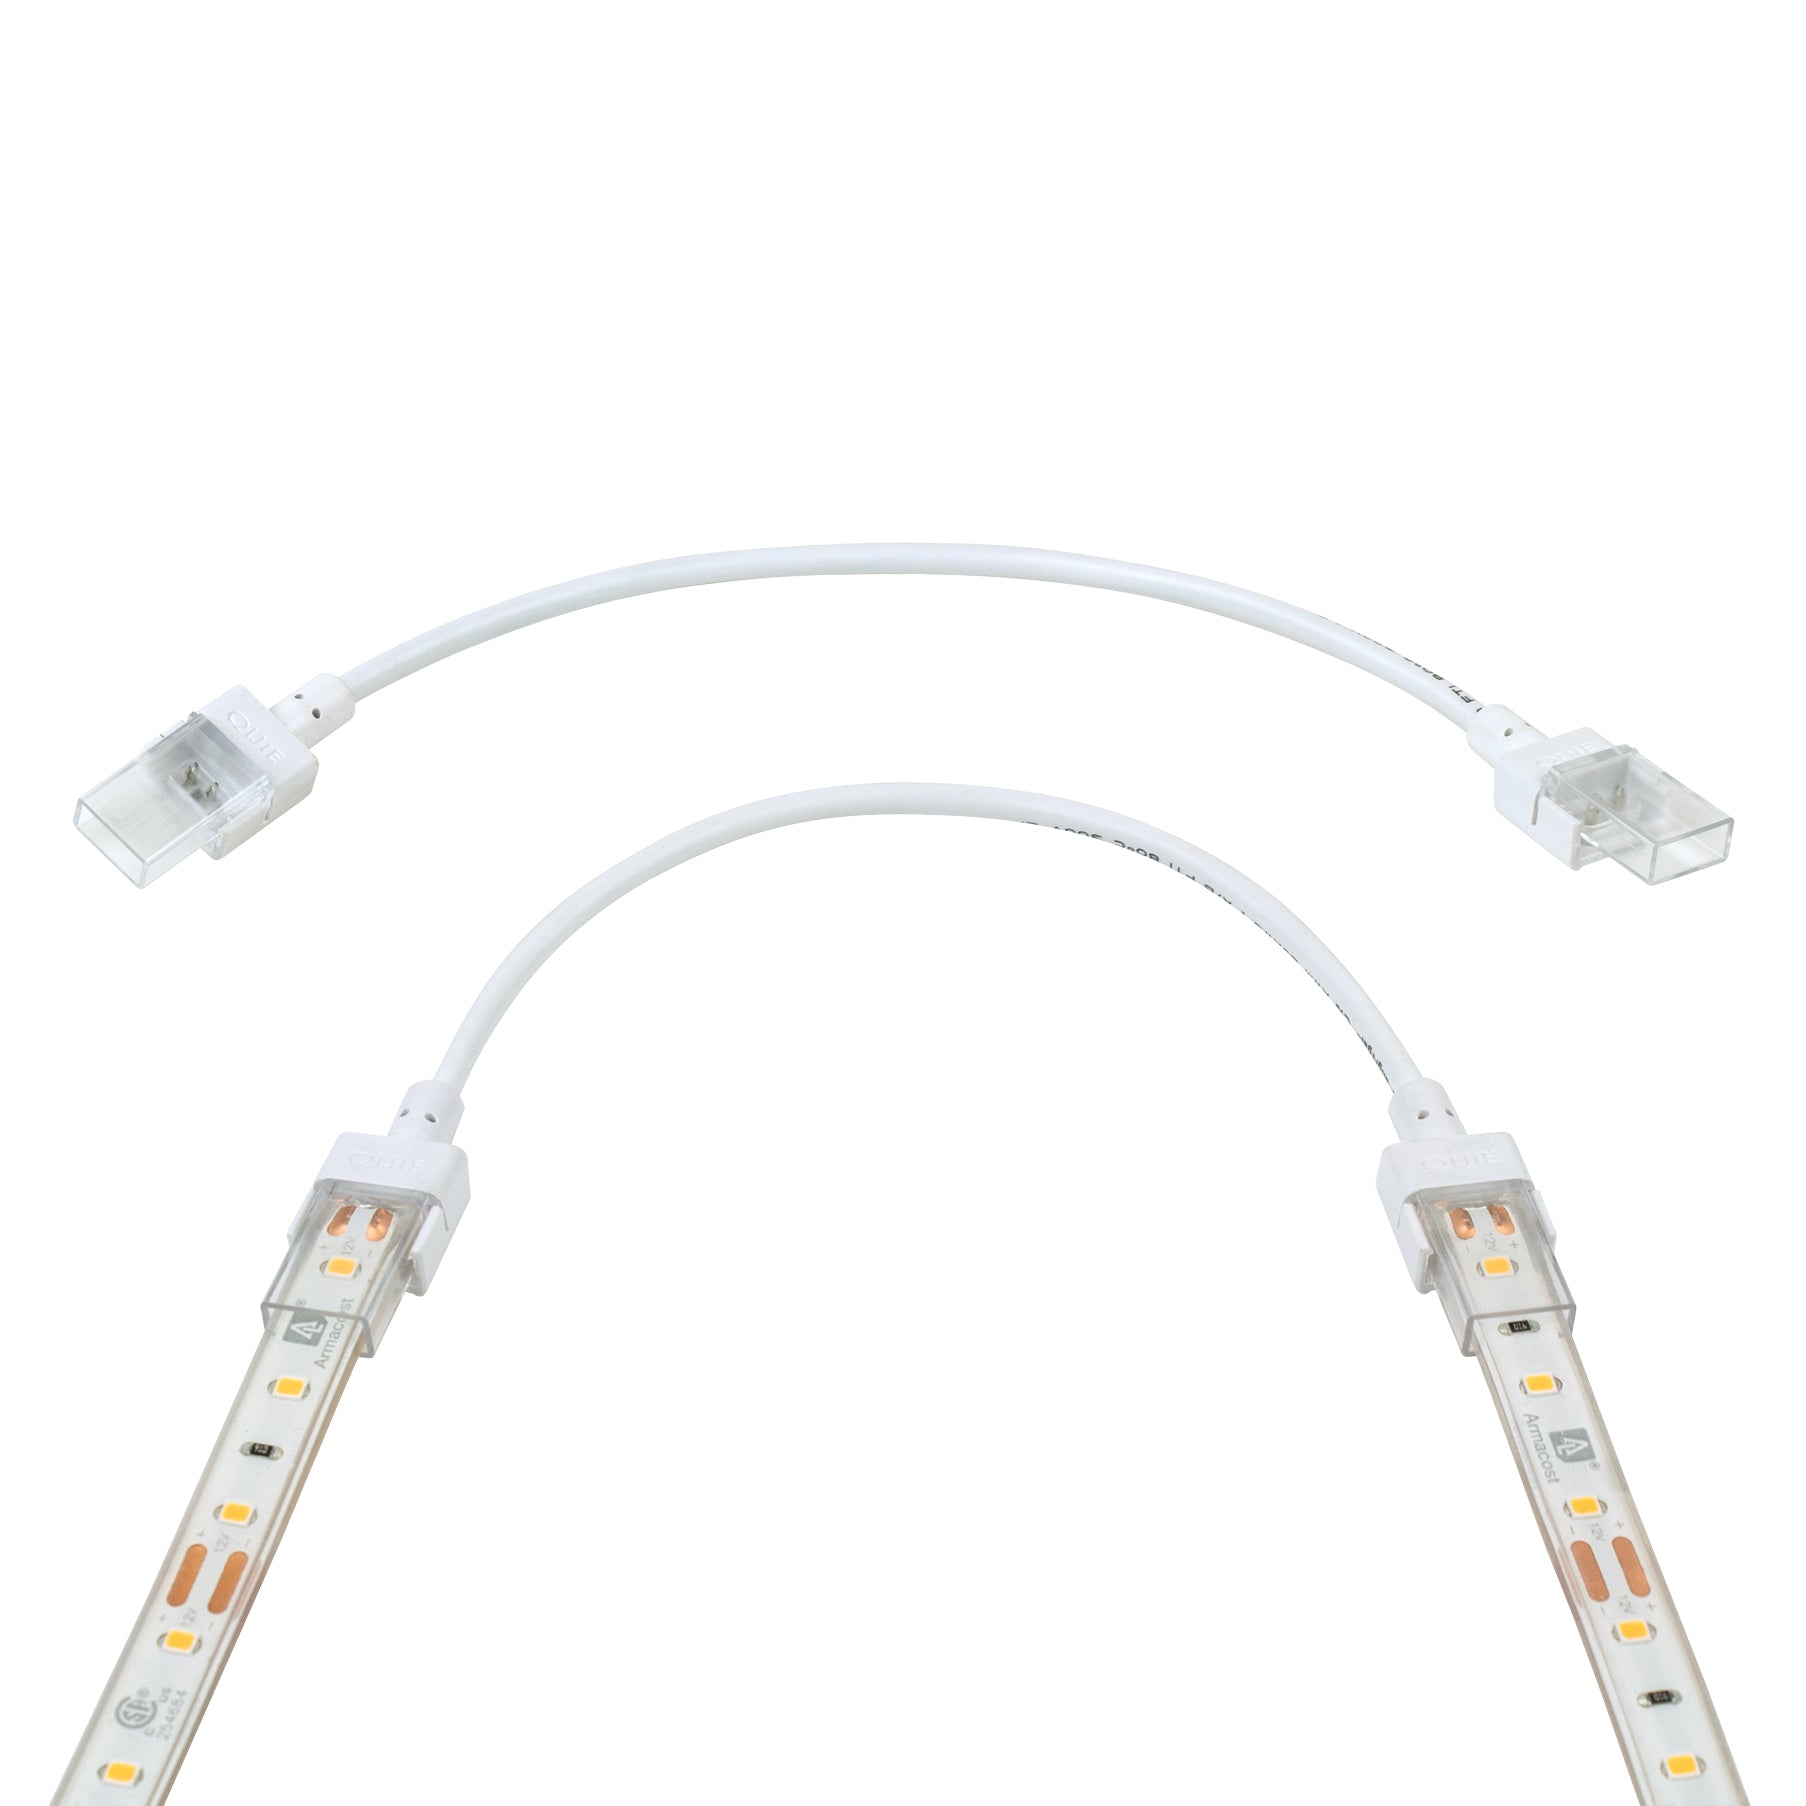 2 Pin IP67 Outdoor LED Strip Light Tape to Tape Connector